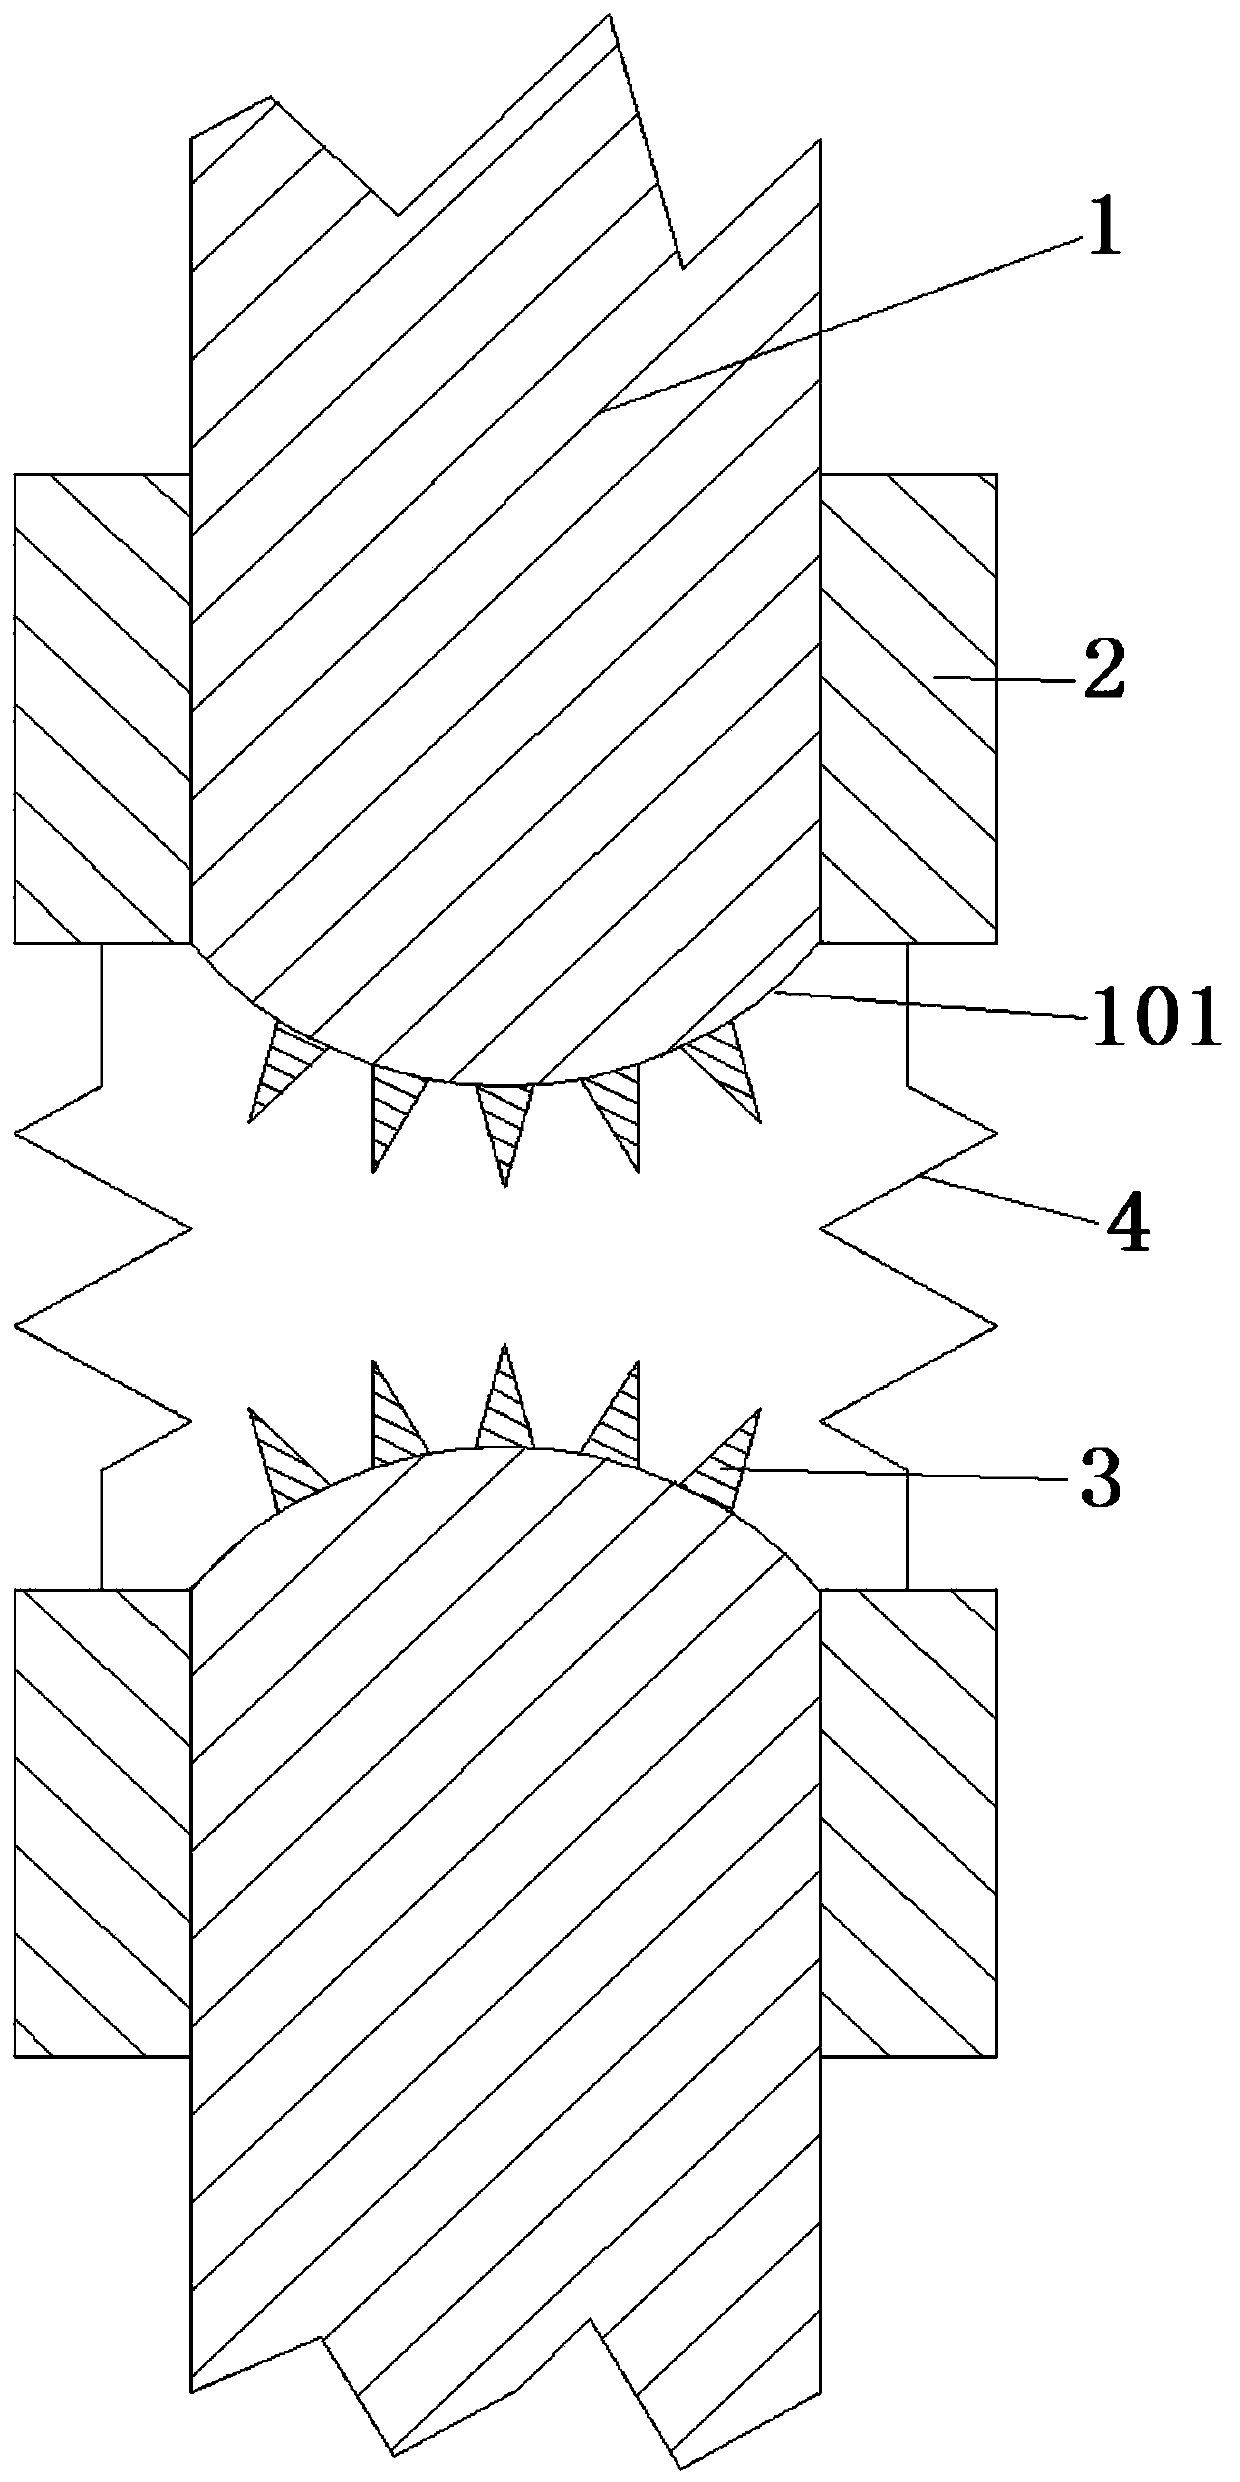 Shear force connection structure for lightning receptors